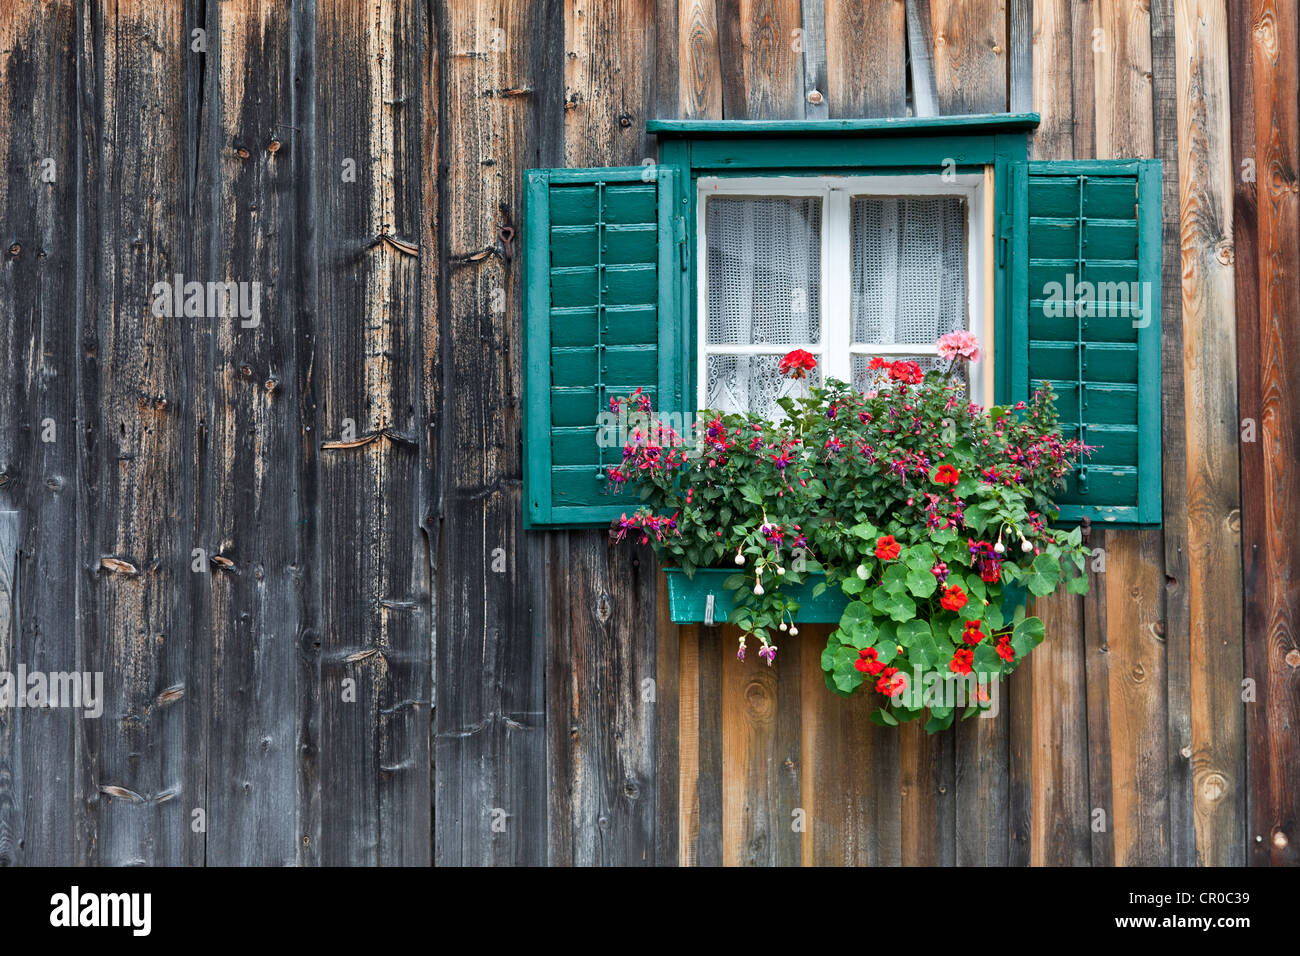 Traditional wooden house, alpine cabin with green window frames and geraniums, Salzkammergut, Austria, Europe Stock Photo